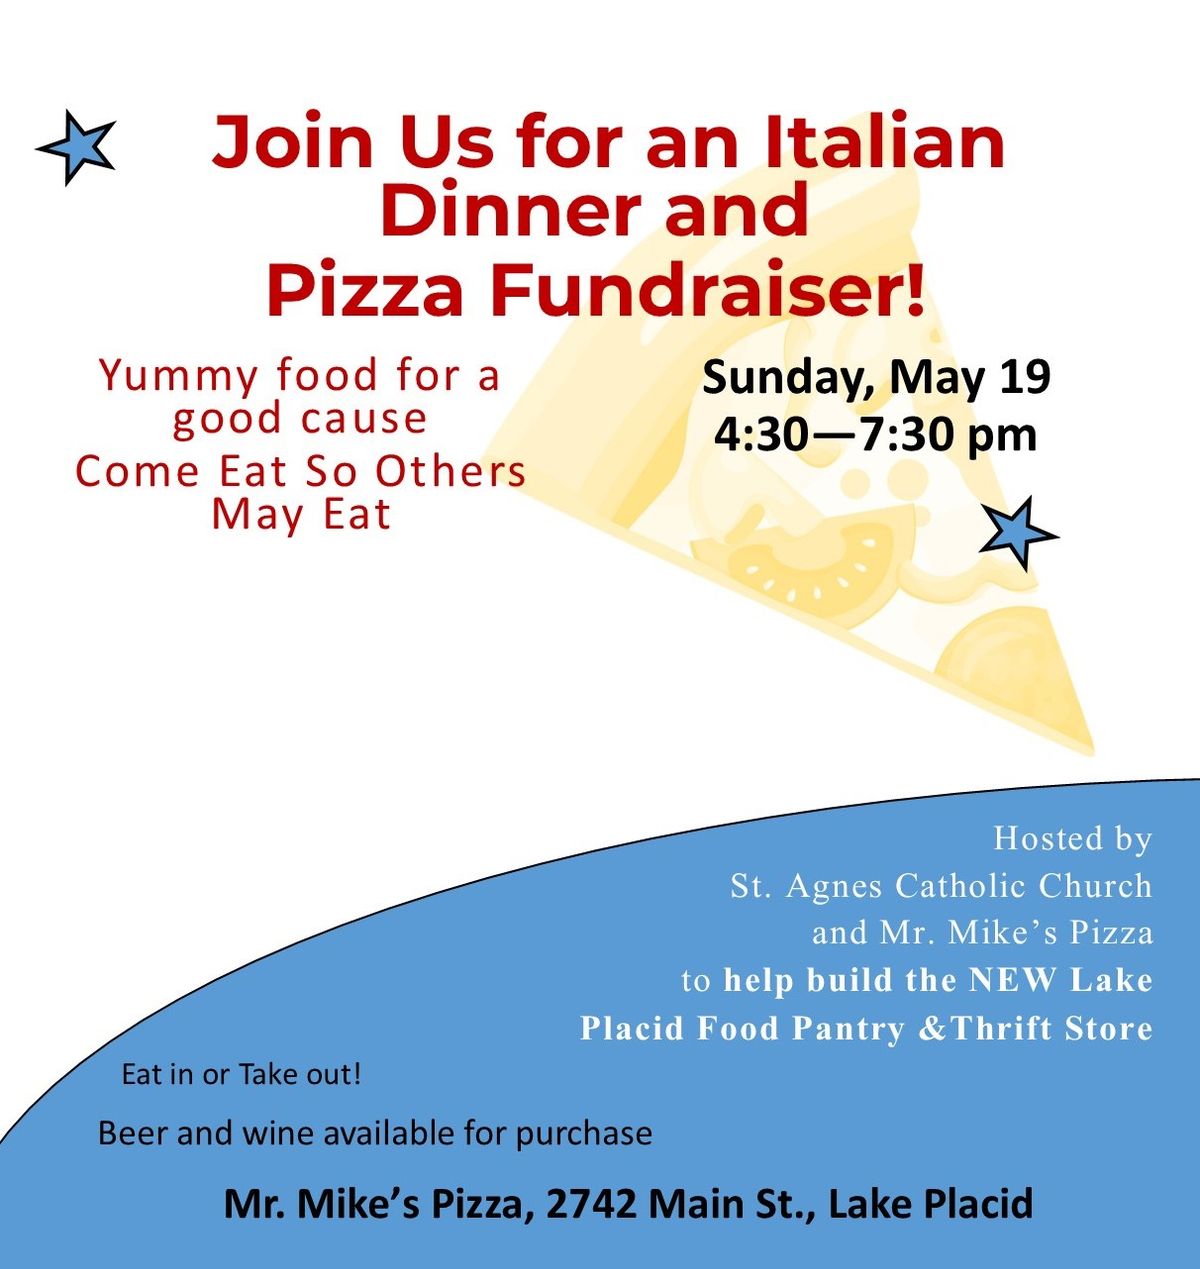 Italian Dinner and Pizza Fundraiser to benefit the NEW LP Food Pantry and Thrift Store building